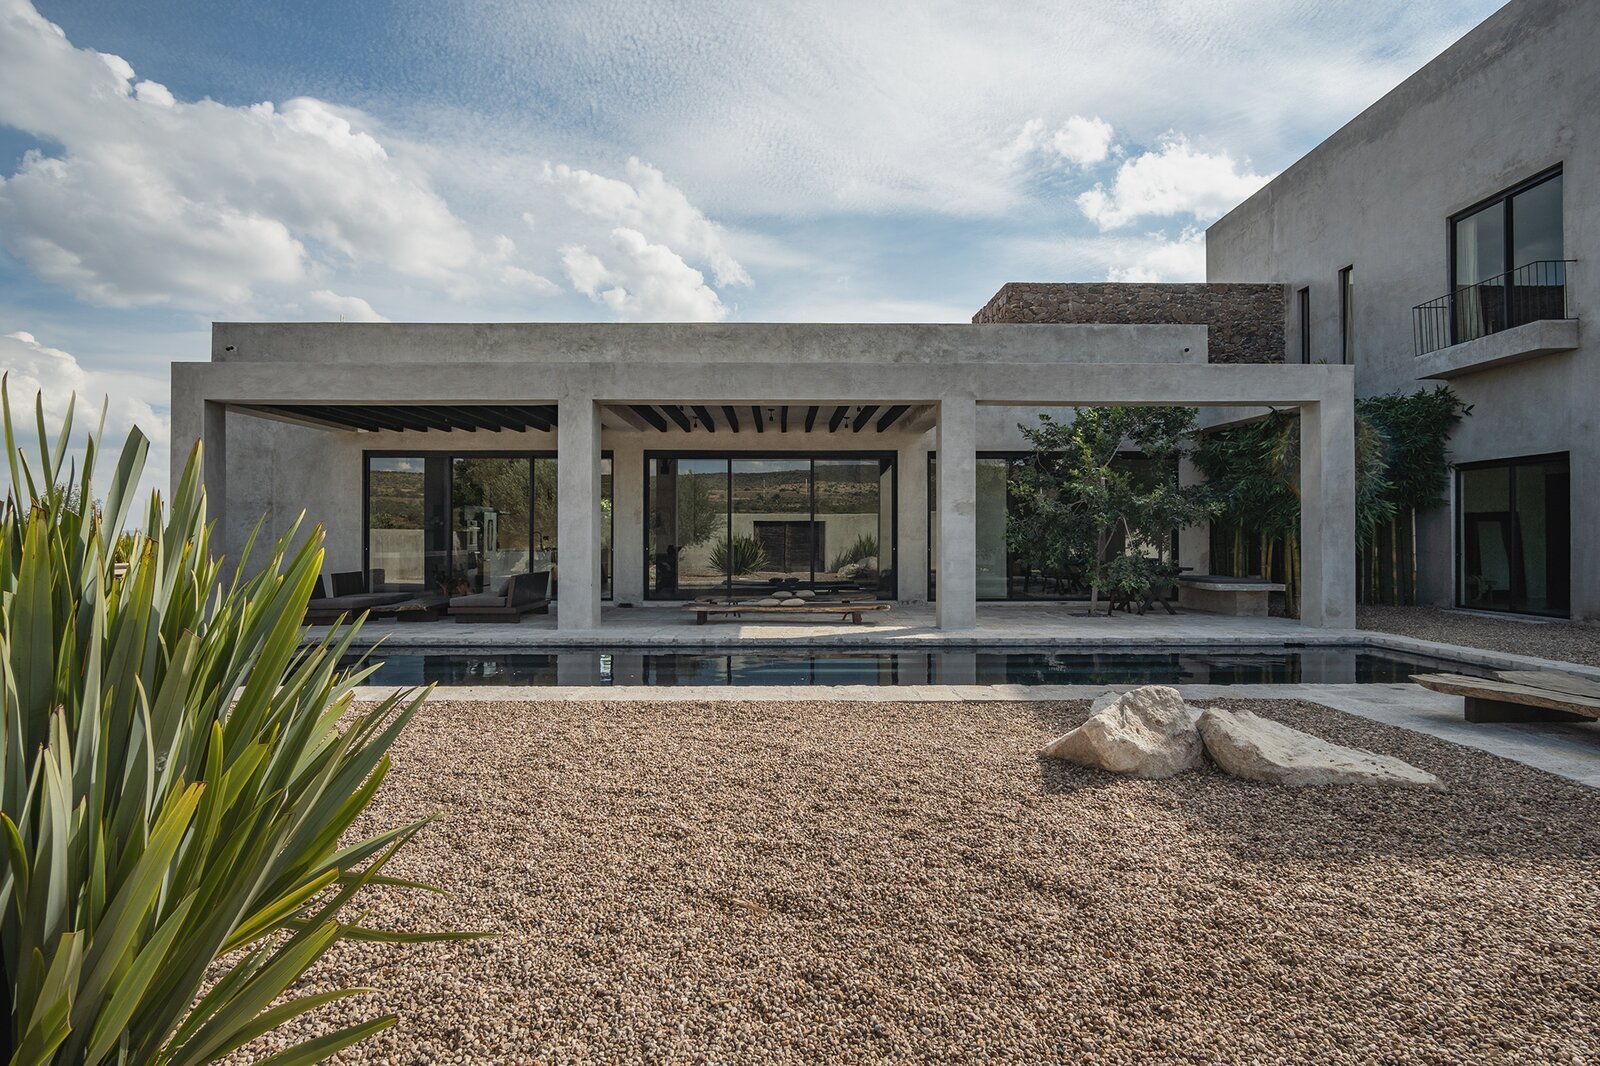 Concrete Is King in This Monumental Home That Just Hit the Market in Mexico